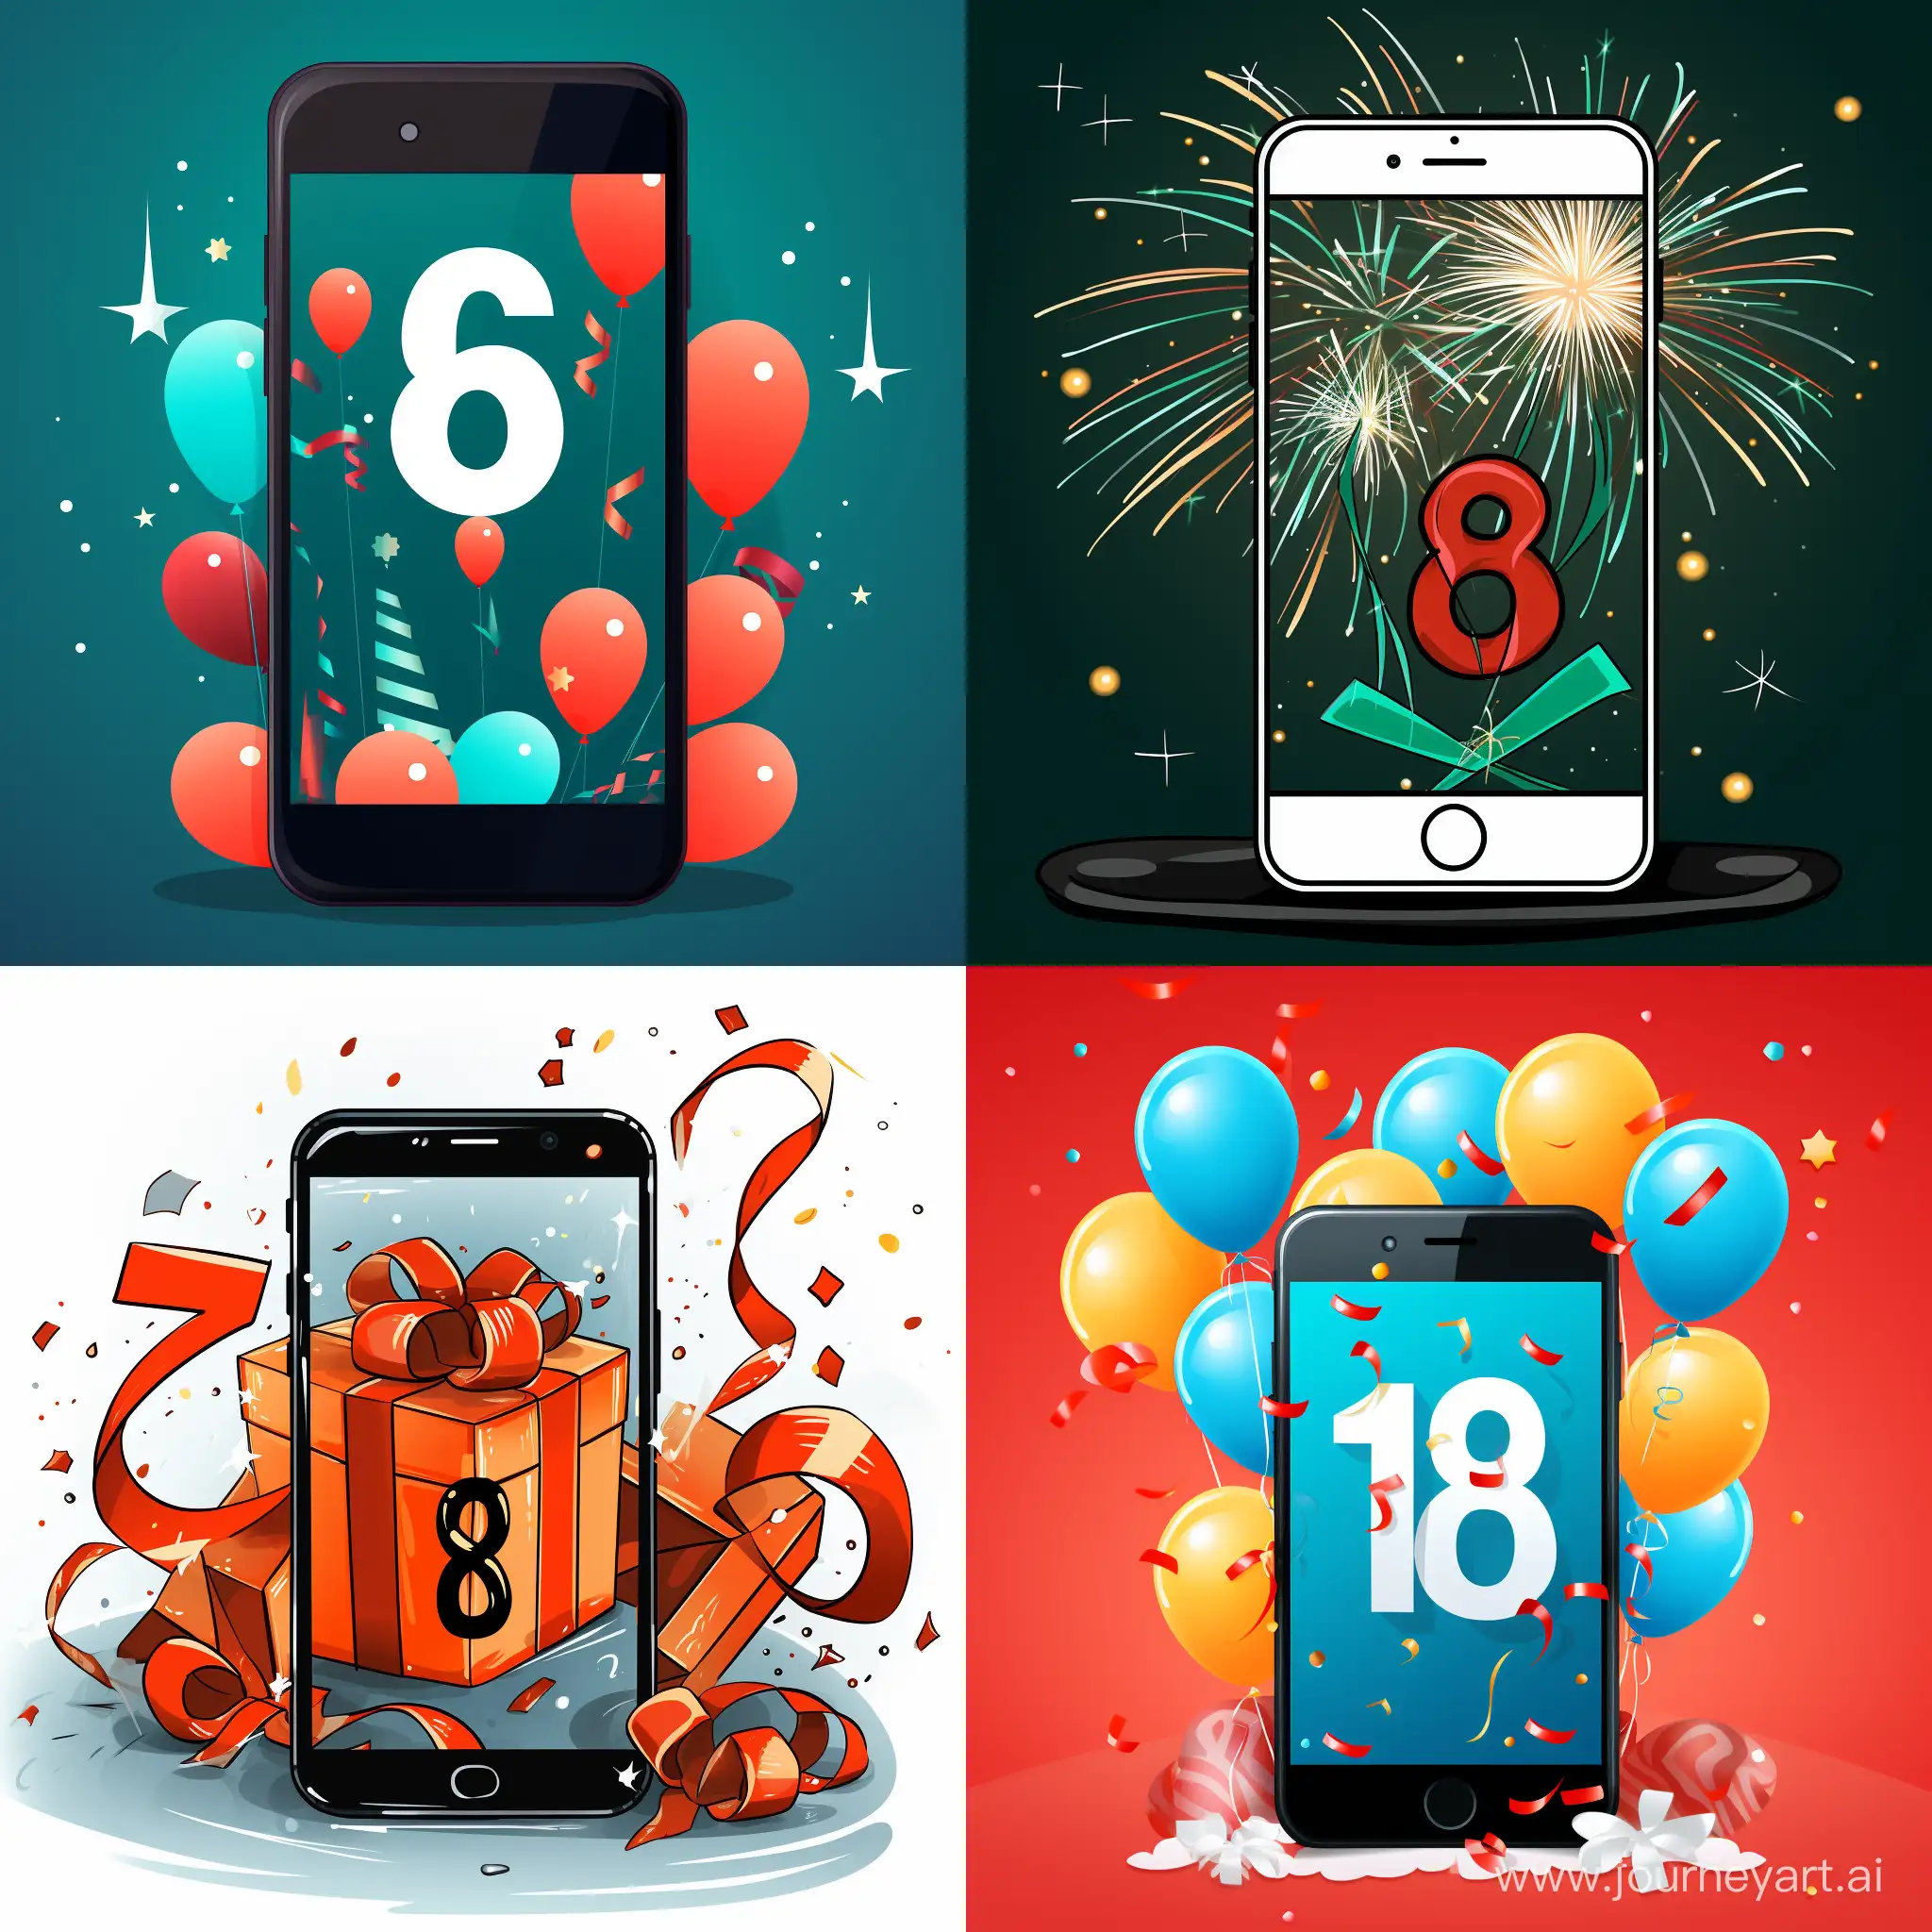 New-Year-2023-Celebration-Image-with-61-Android-App-Users